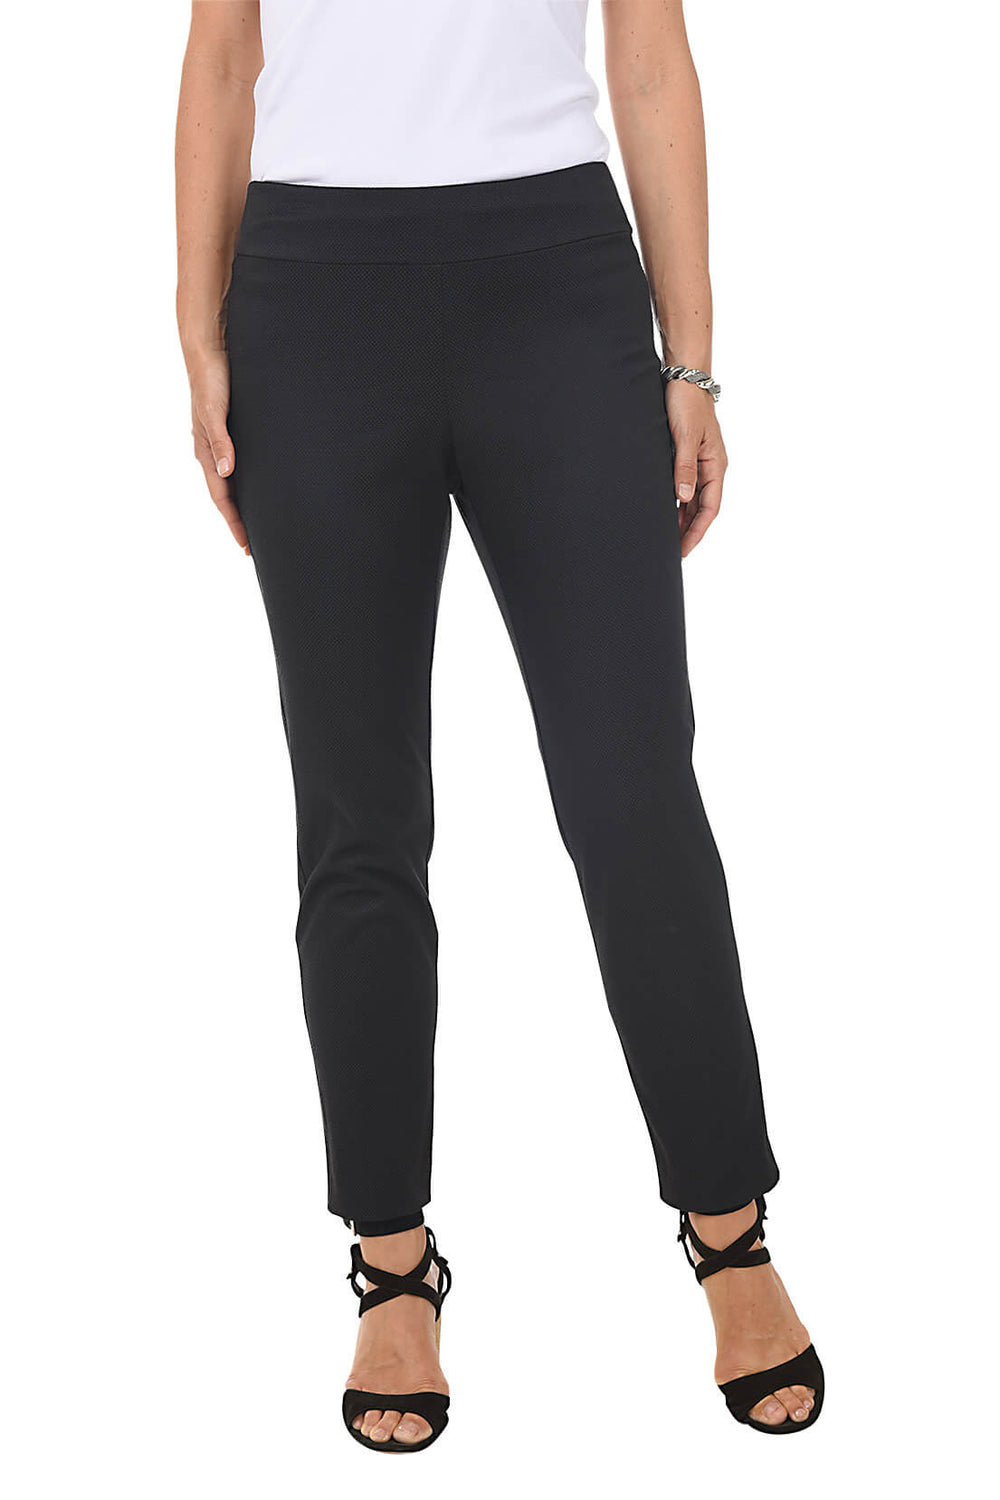 Krazy Larry Pique Pull-On Ankle Pant